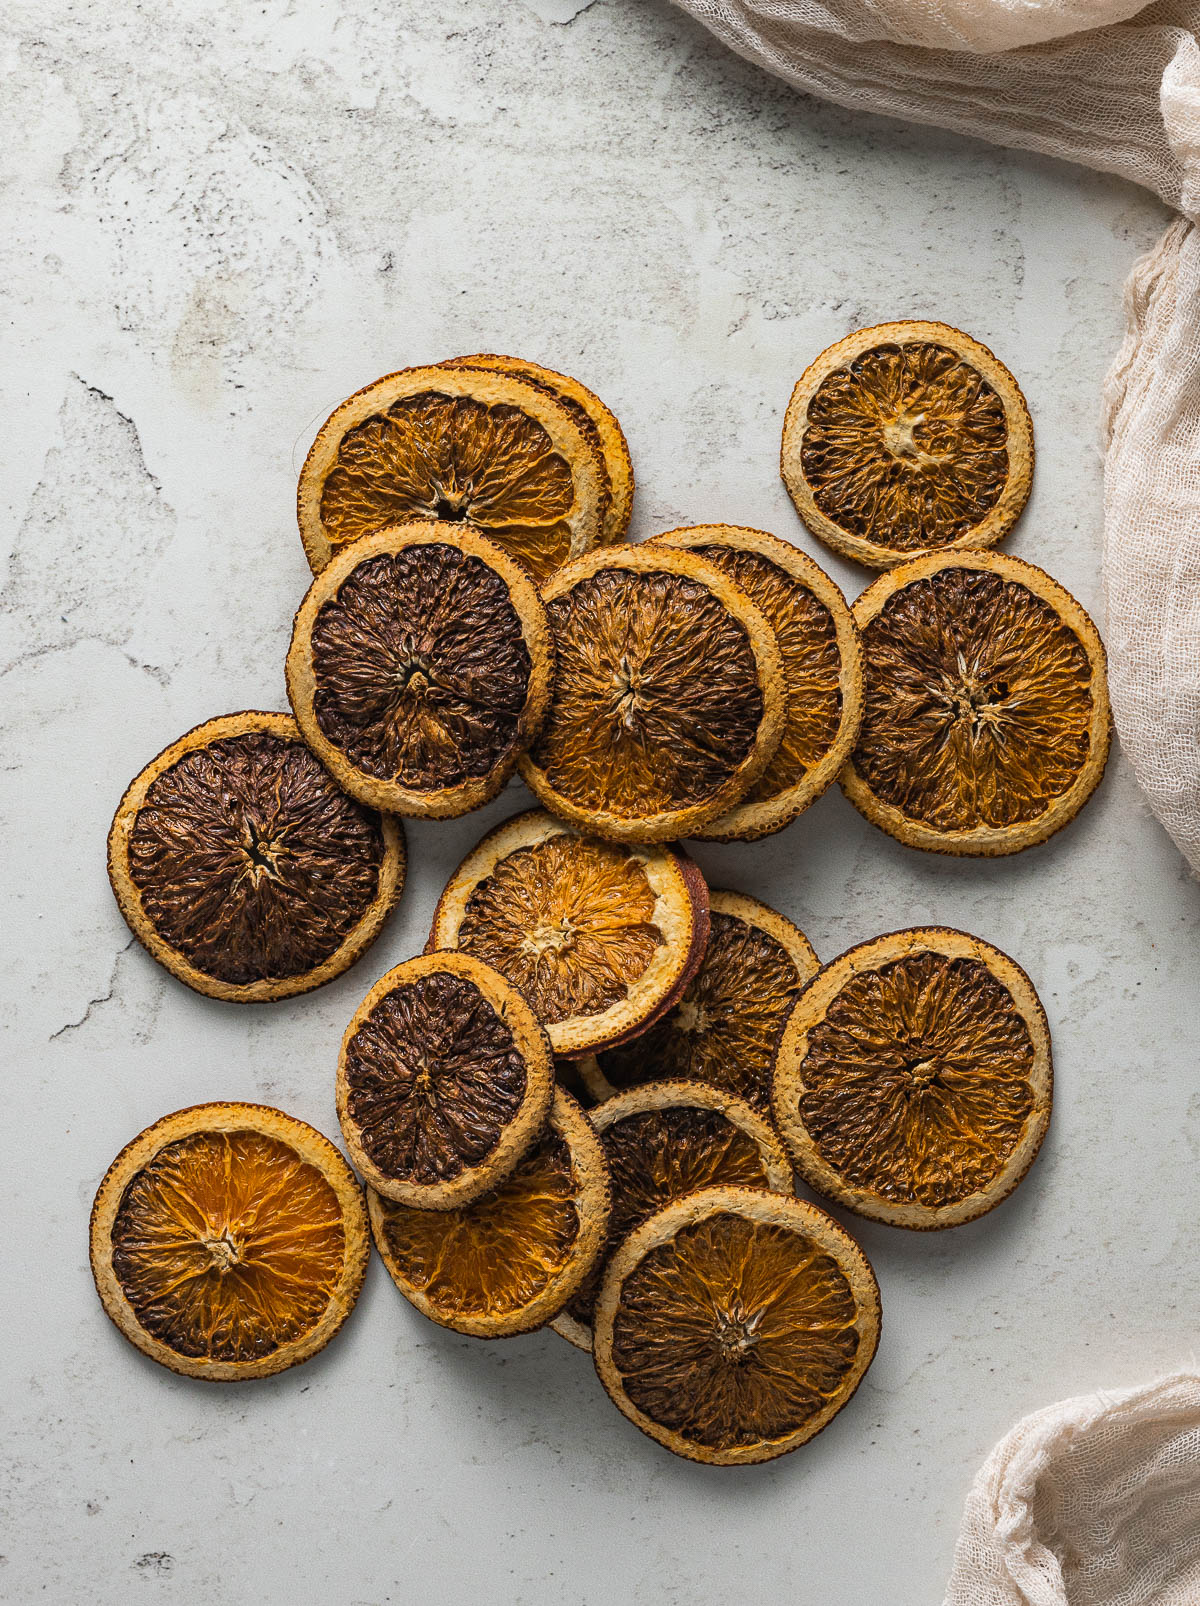 This is what happens when you overbake dried orange slices